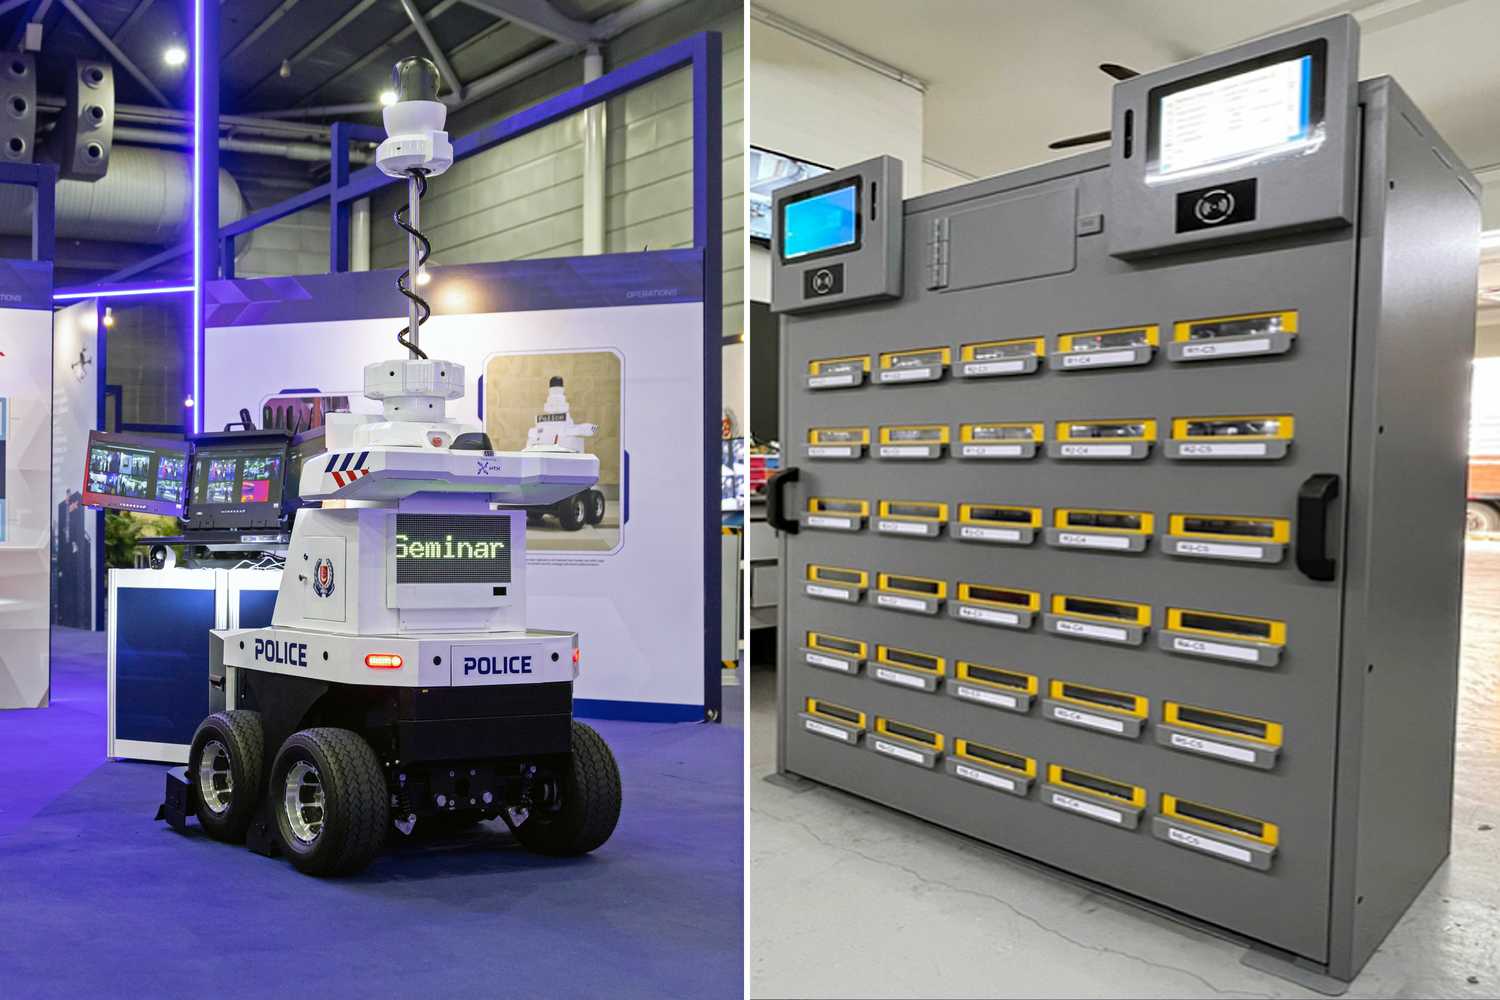 a patrol robot on the left. It is white with rugged wheels. The automated armoury system is grey in colour with many drawers which officers can release after identity is verified. The drawers will contain their weapons.